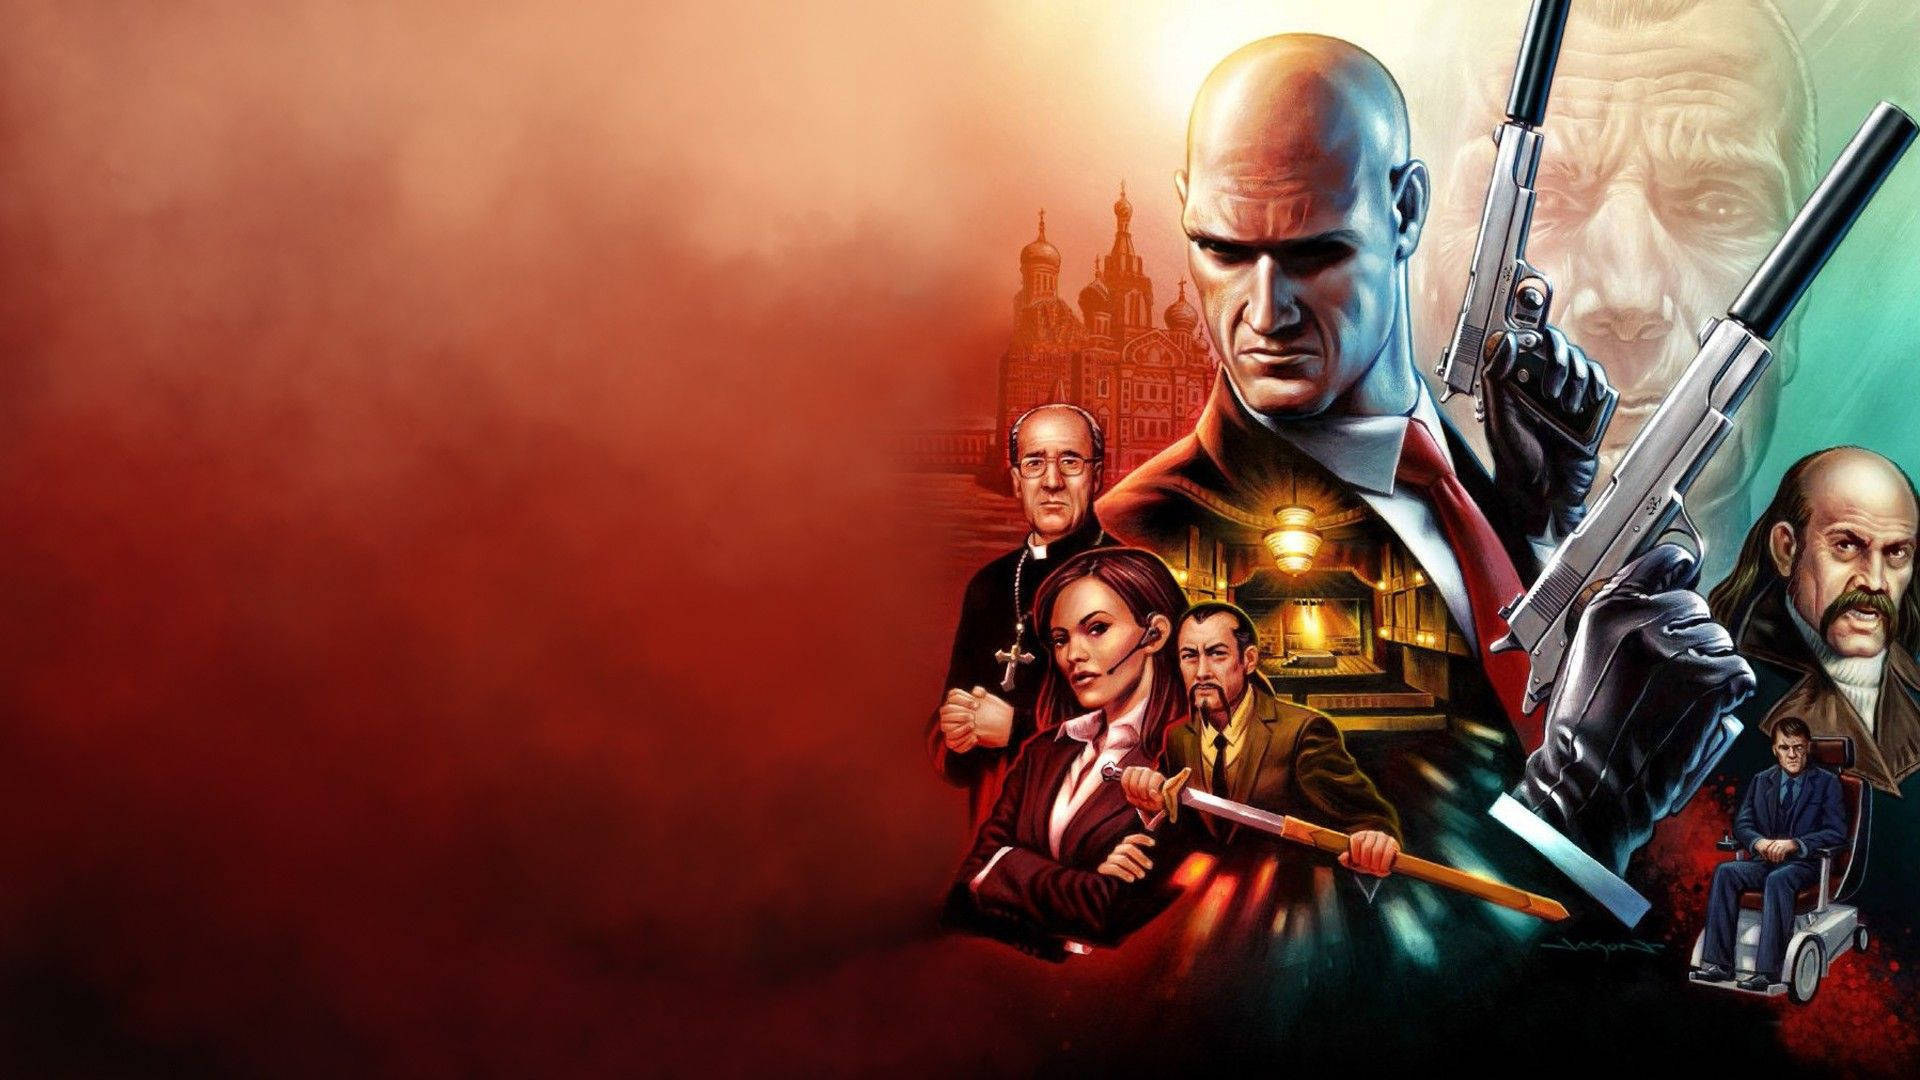 Cool Hitman Absolution Poster Background